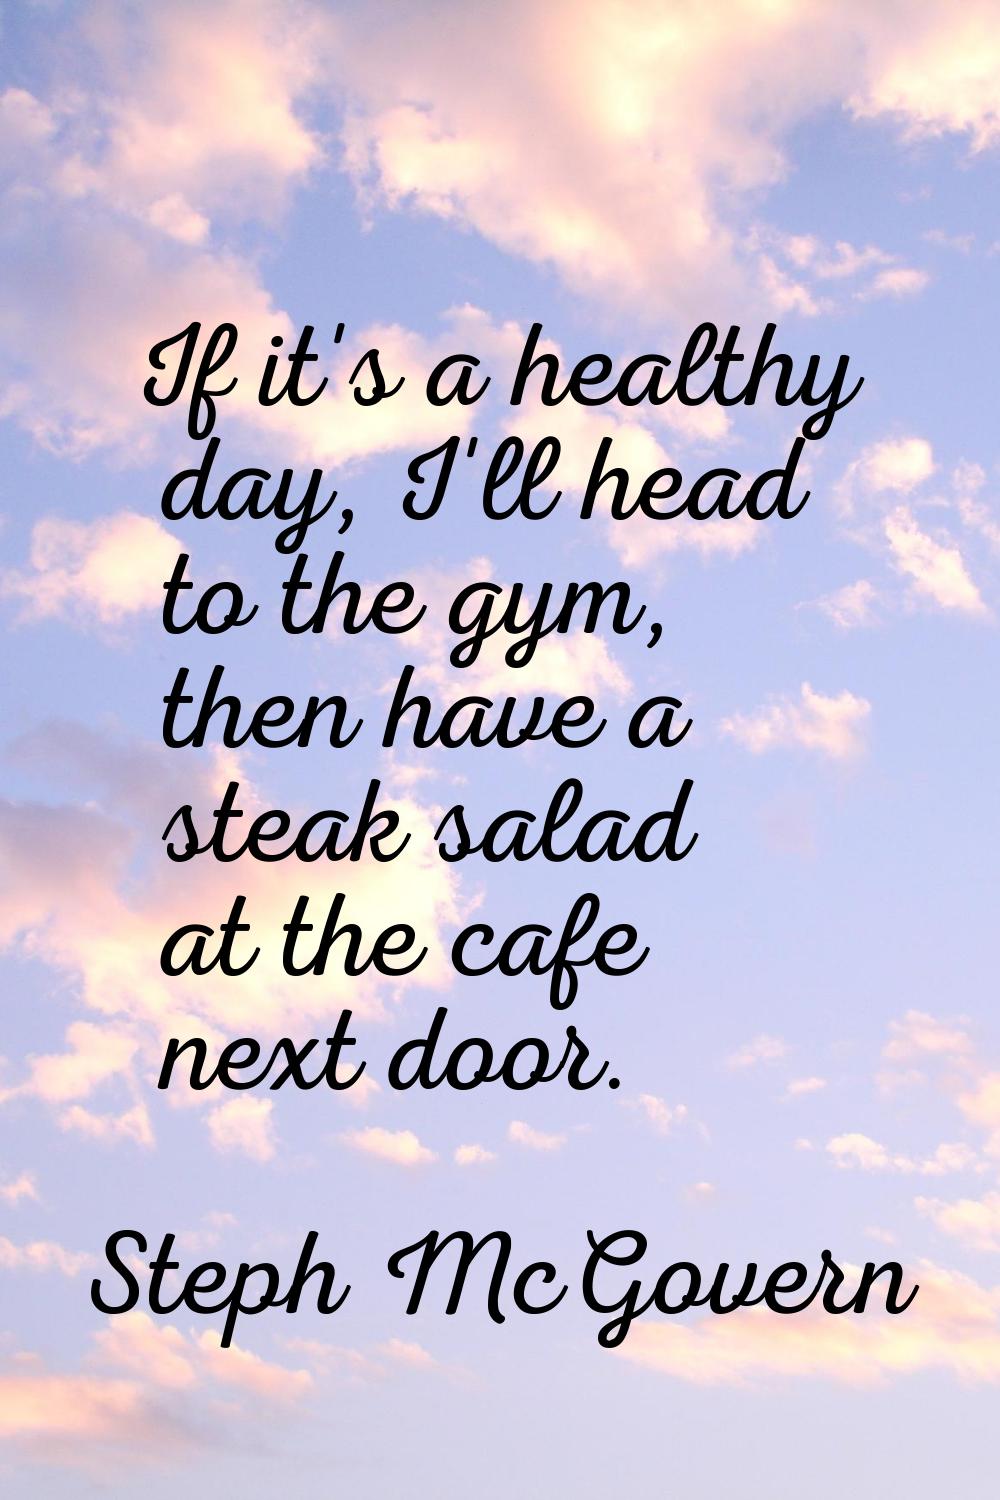 If it's a healthy day, I'll head to the gym, then have a steak salad at the cafe next door.